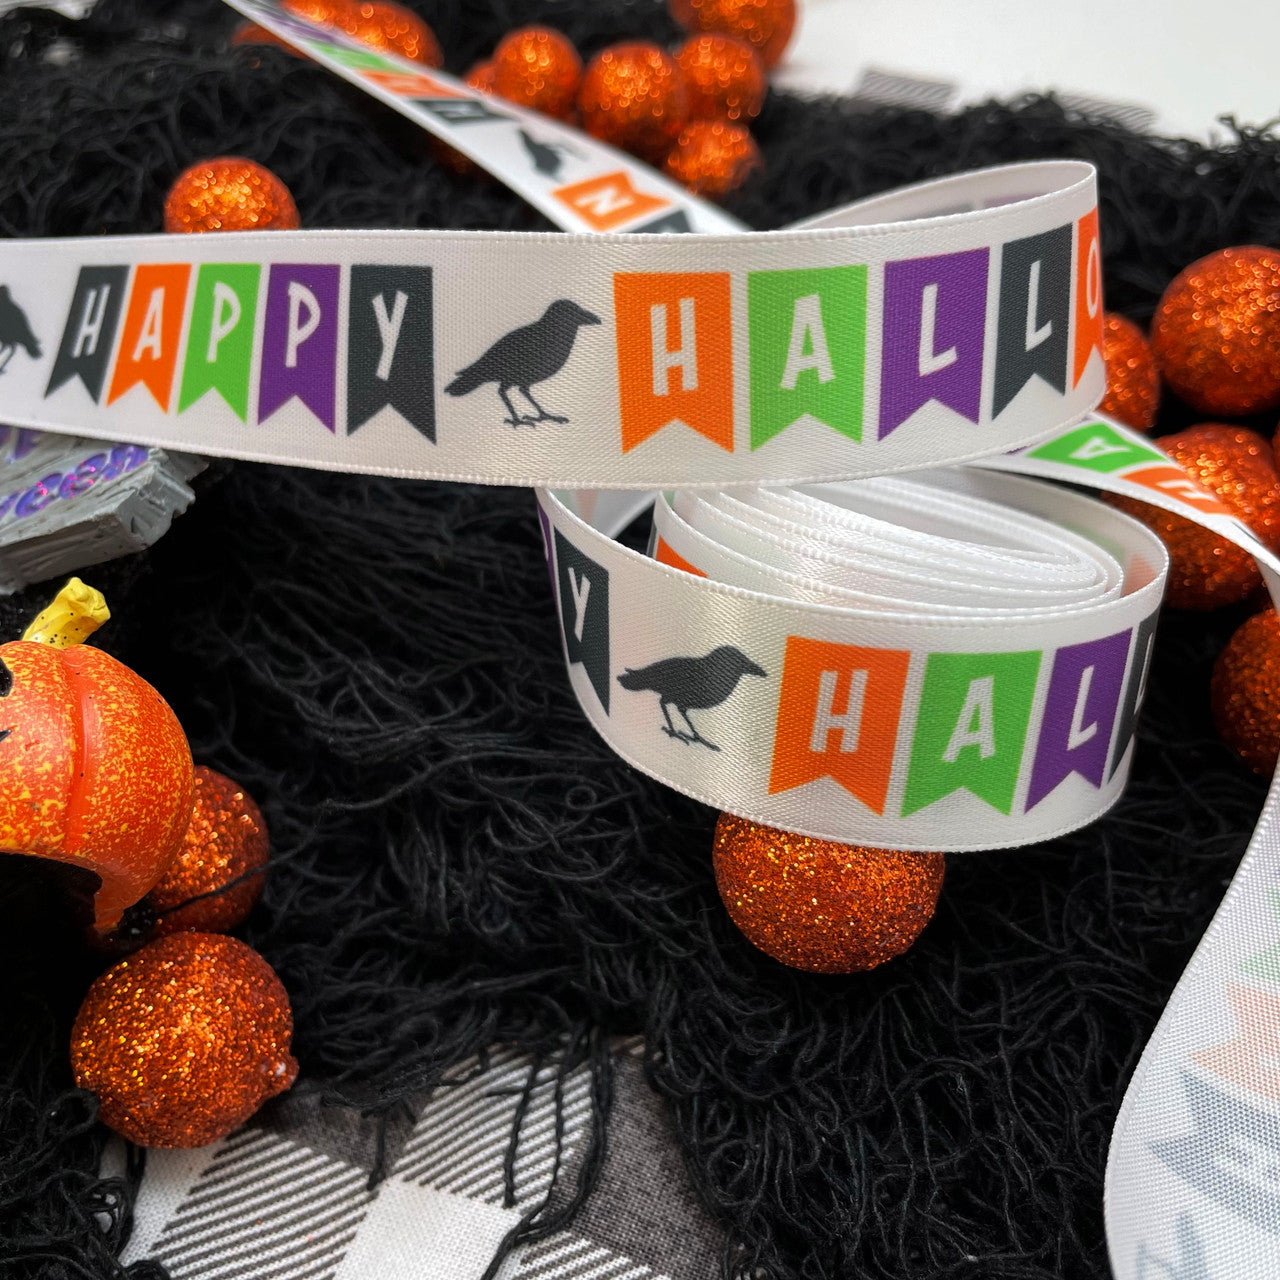 Our colorful Halloween banner ribbon makes the perfect tie for Halloween gifts and treat bags!